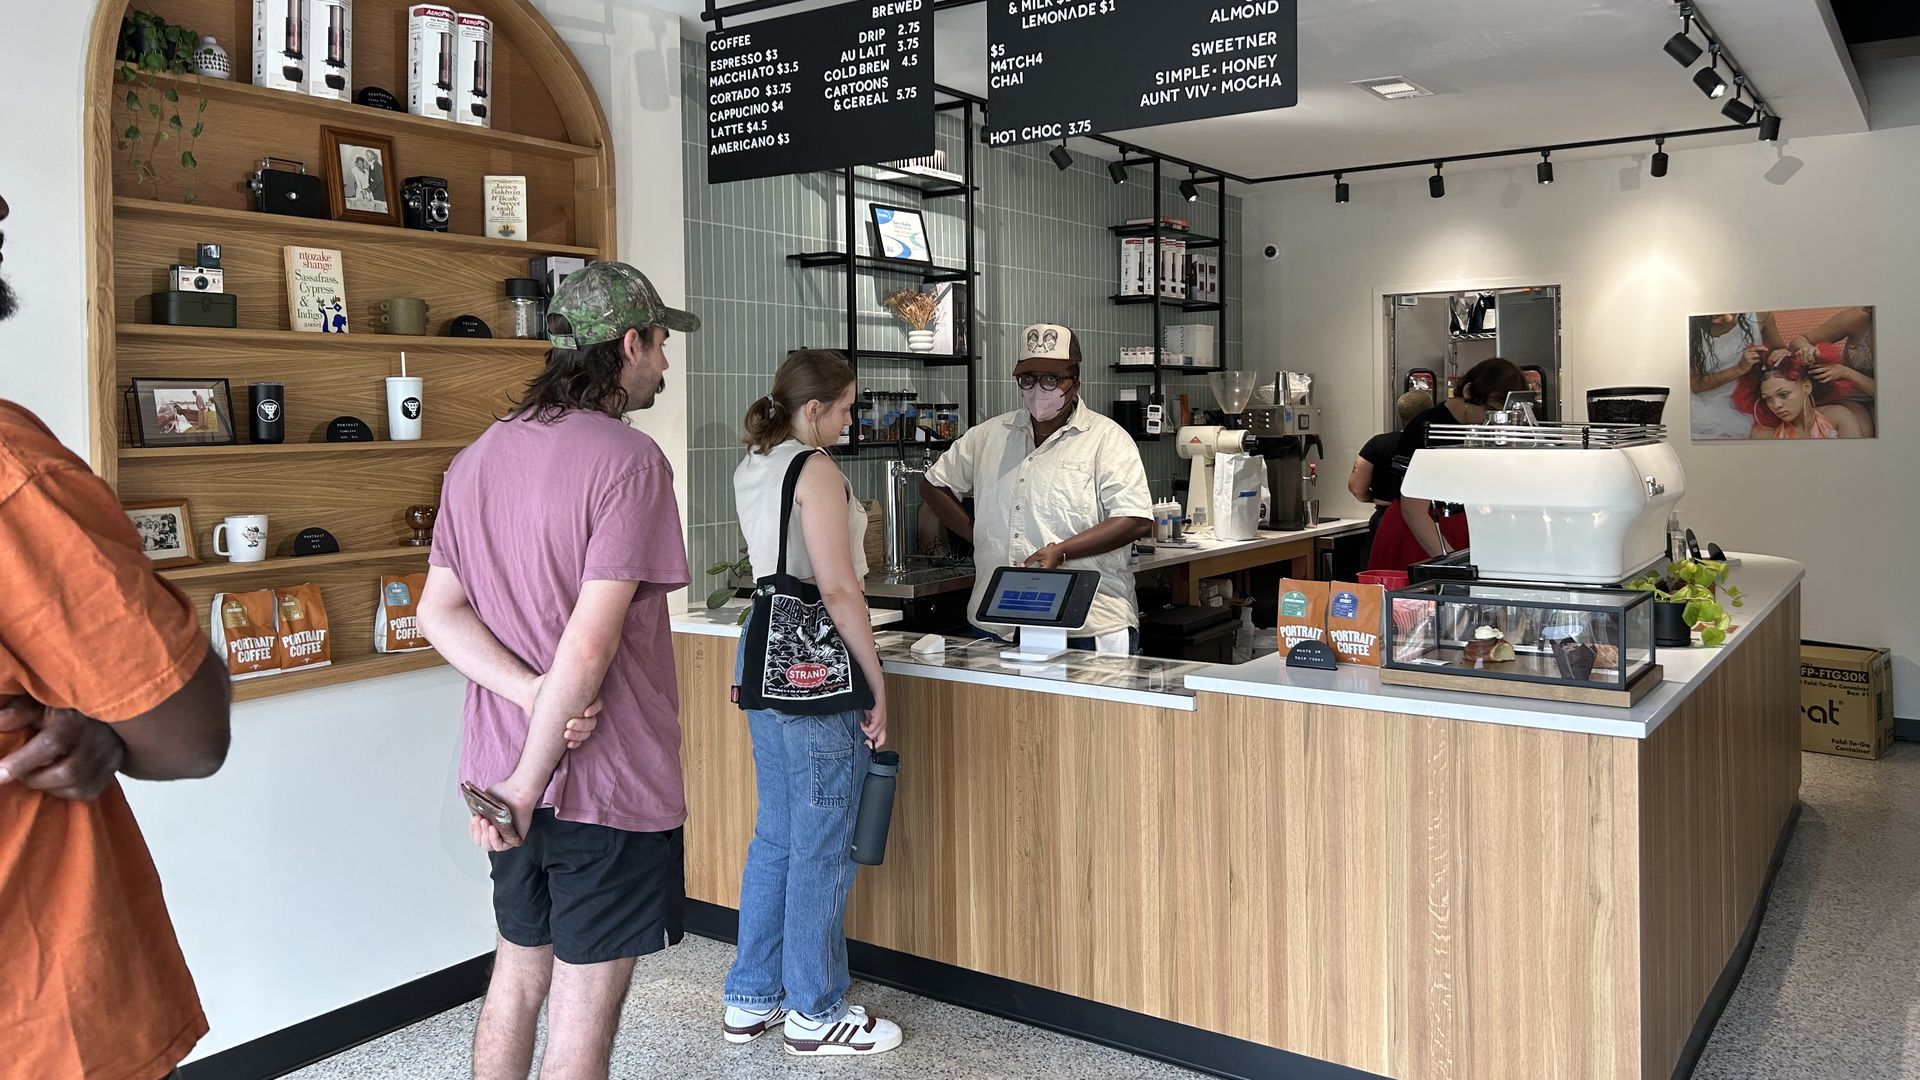 Two people wait in line at a modern and bright coffee shop with a black-and-white simple menu over the counter and shelves lined with cameras and mugs